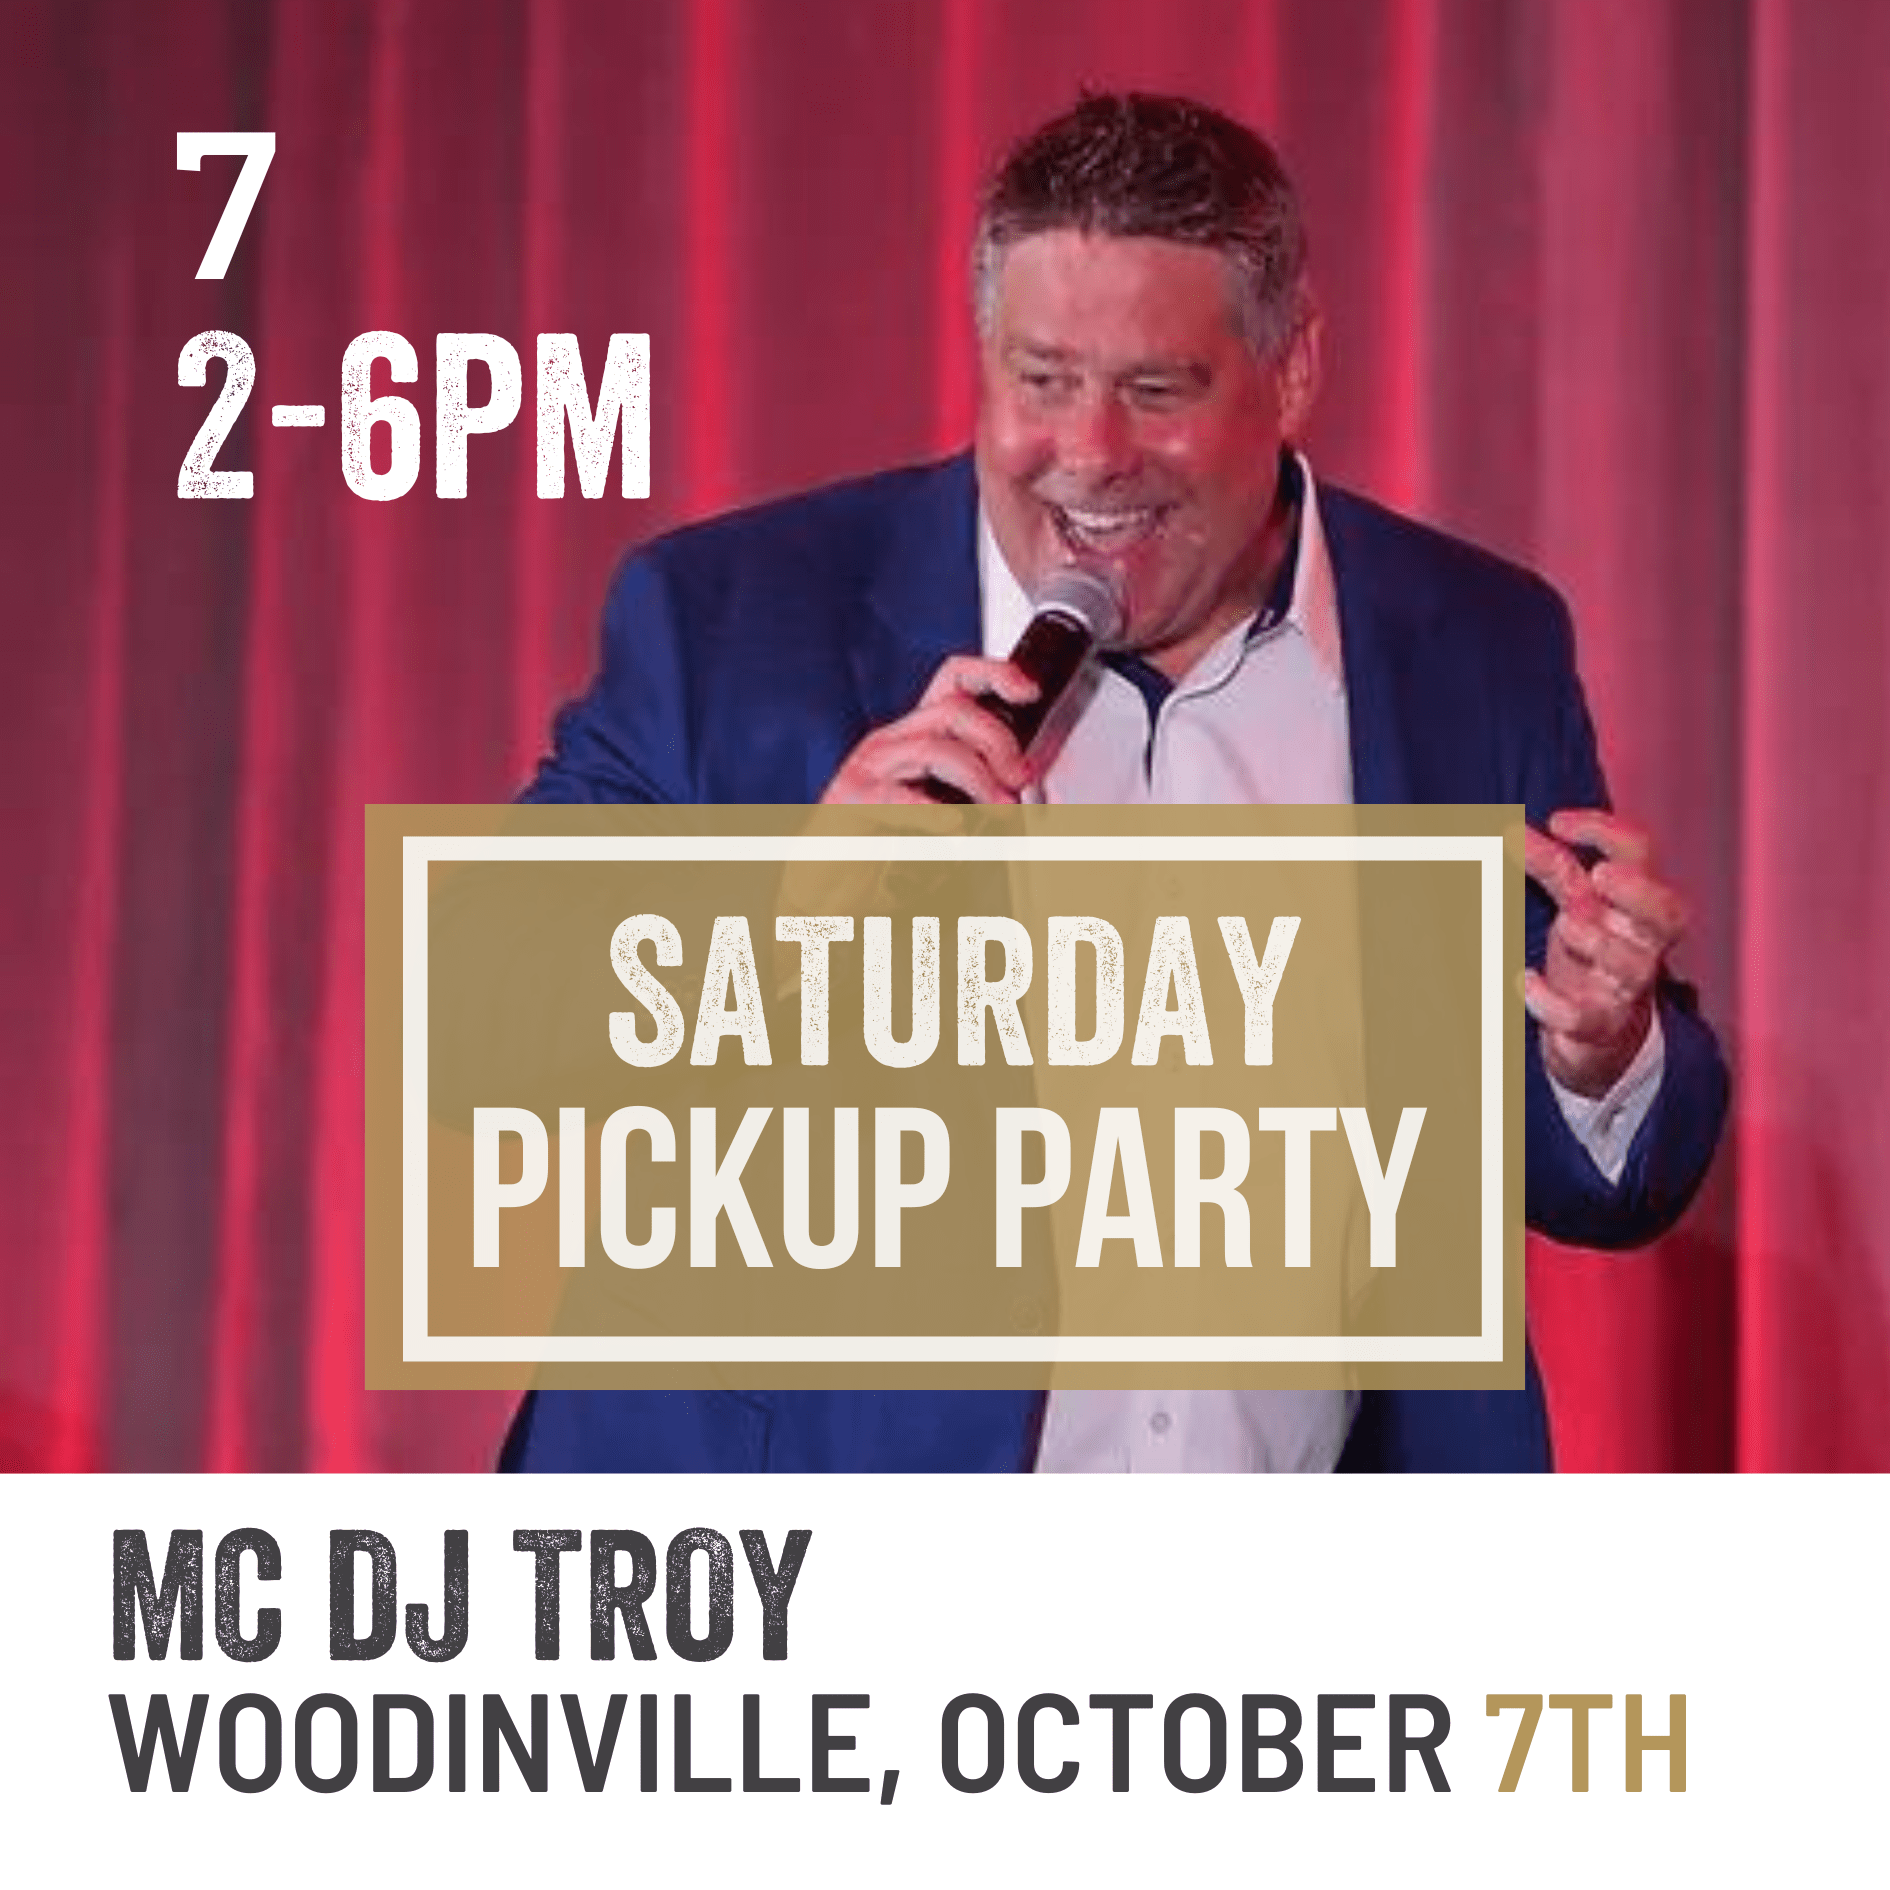 Club Pick-up Event EFESTE Woodinville with MC DJ Troy